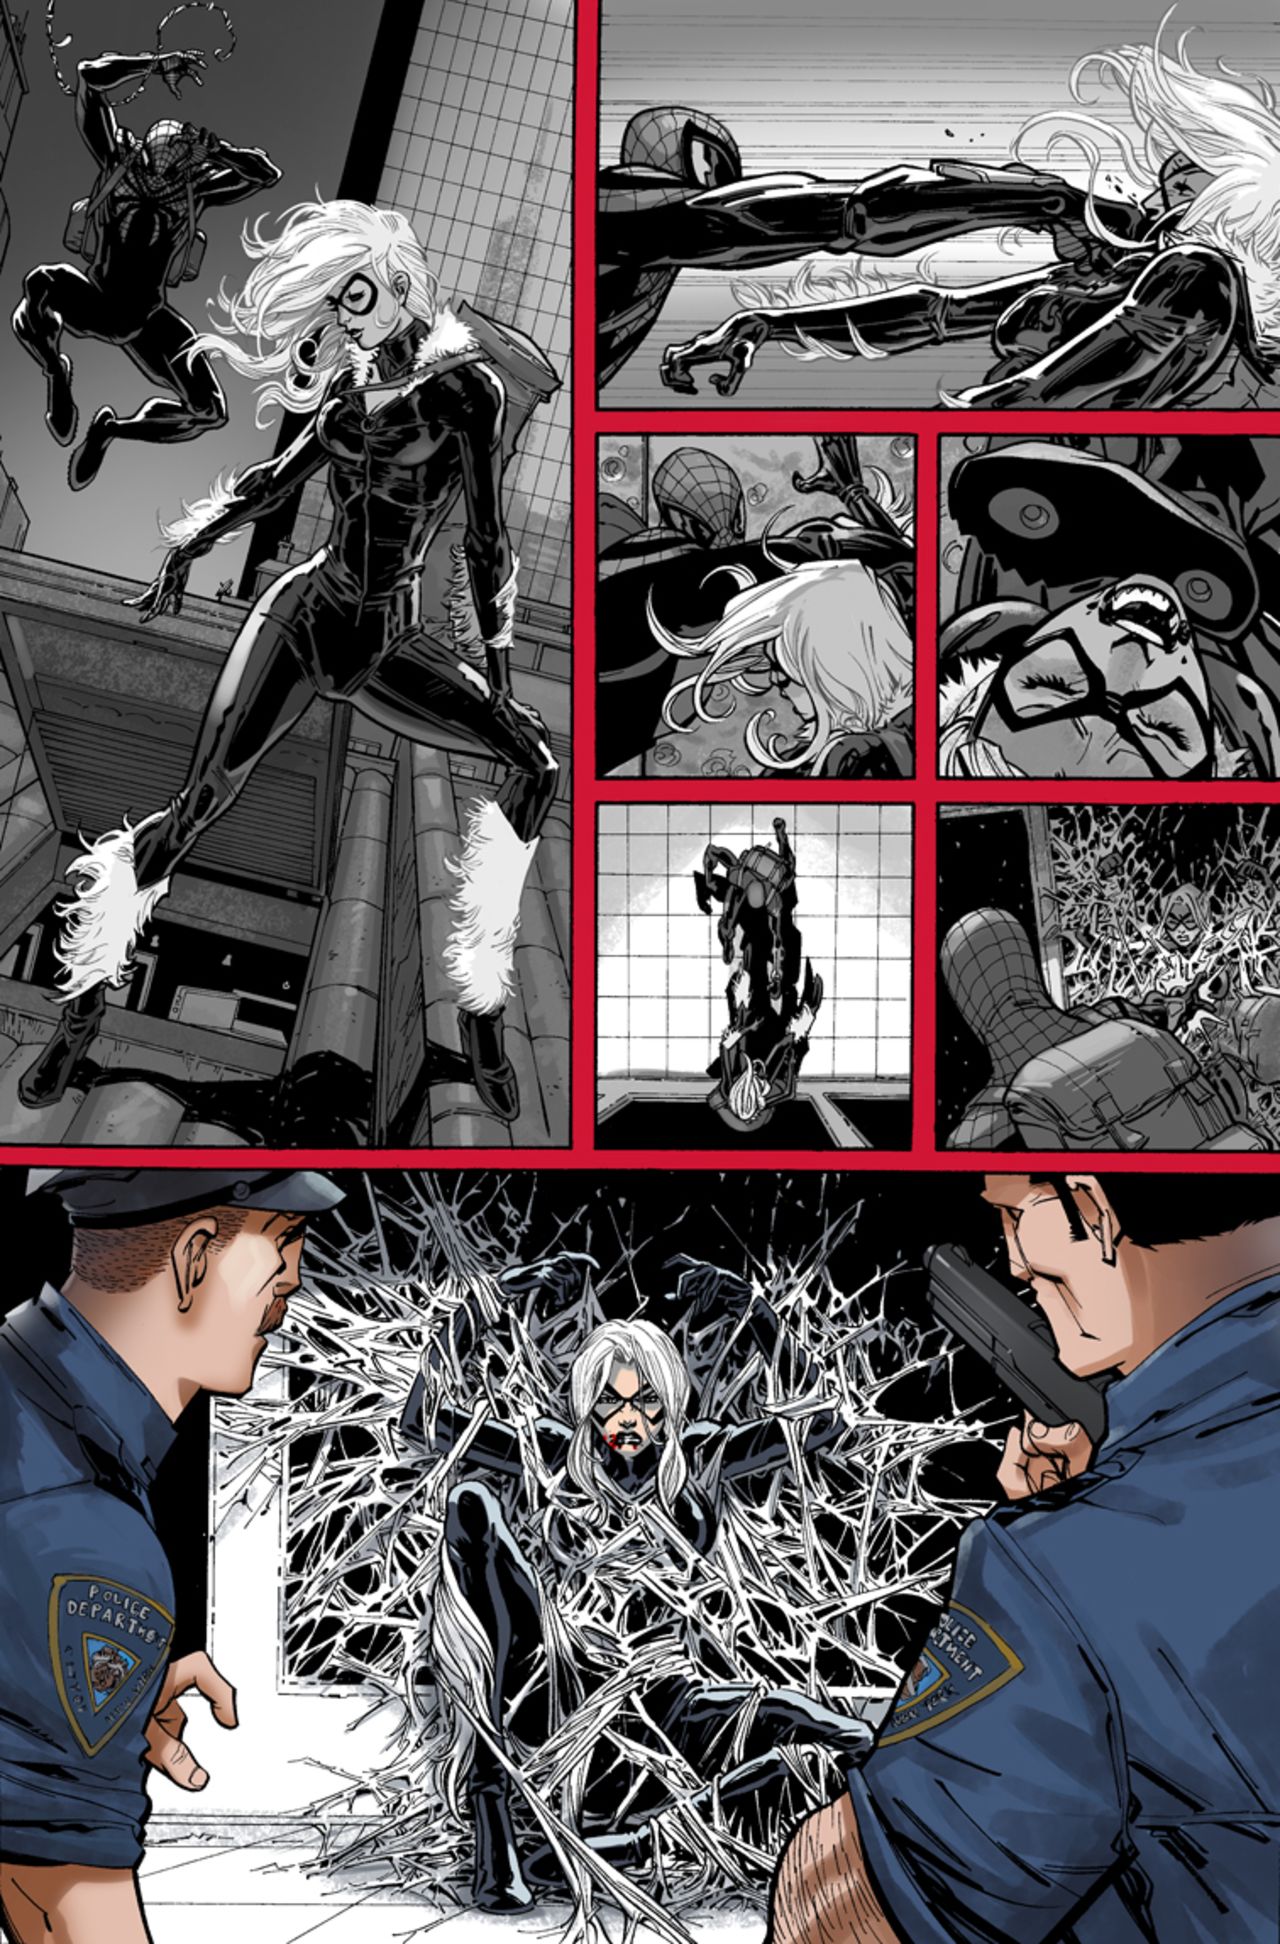 In the first issue, fans flash back to a confrontation between Spider-Man and Black Cat, which ends up with Black Cat in prison.